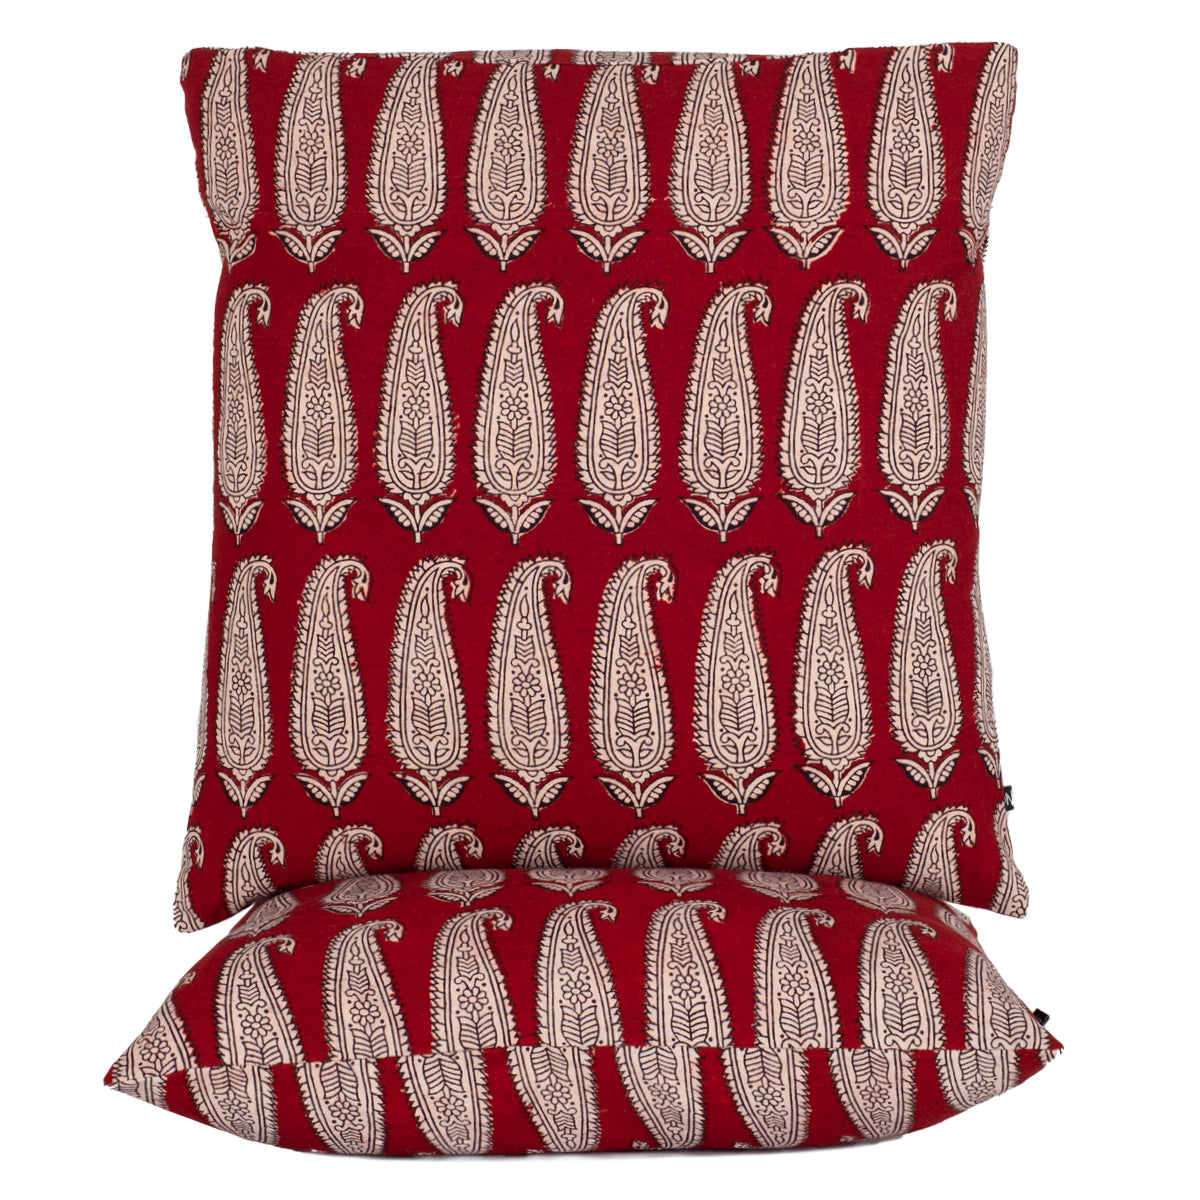 Paisley Bagh Hand Block Print Cotton Cushion Cover - Red-1